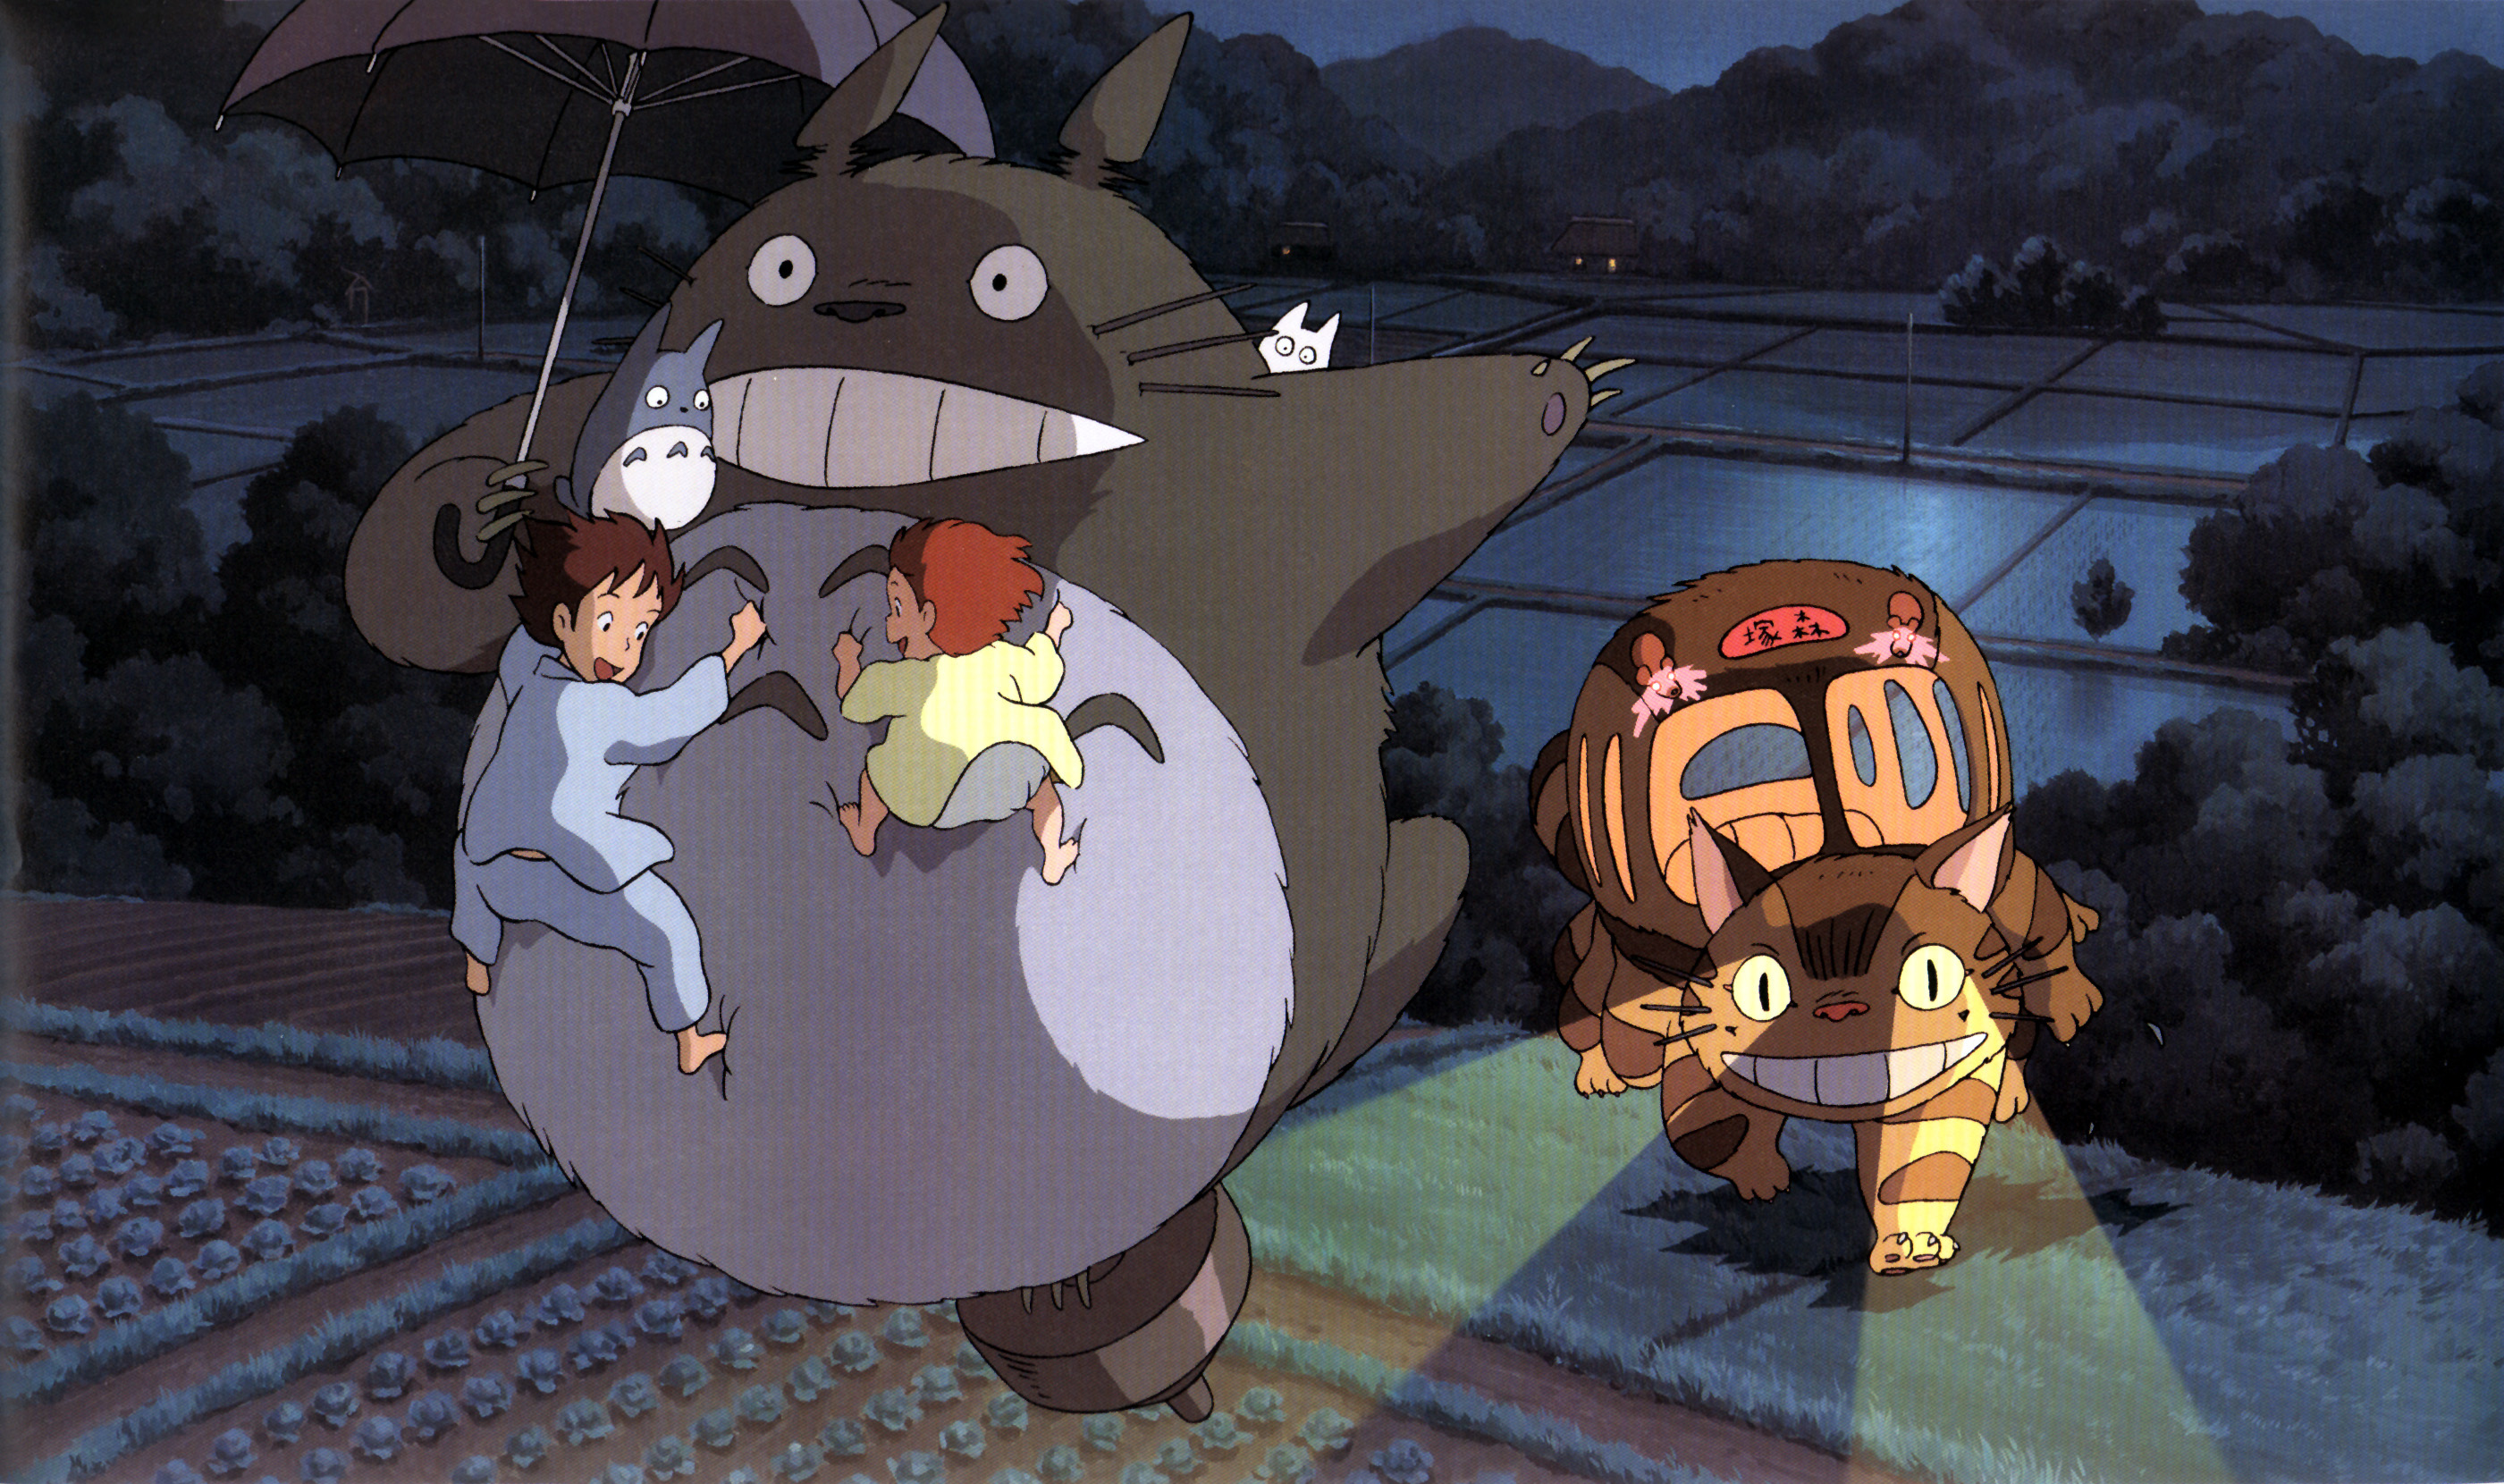 HD desktop wallpaper featuring characters from Studio Ghibli's My Neighbor Totoro with Totoro and children on a magical flight.